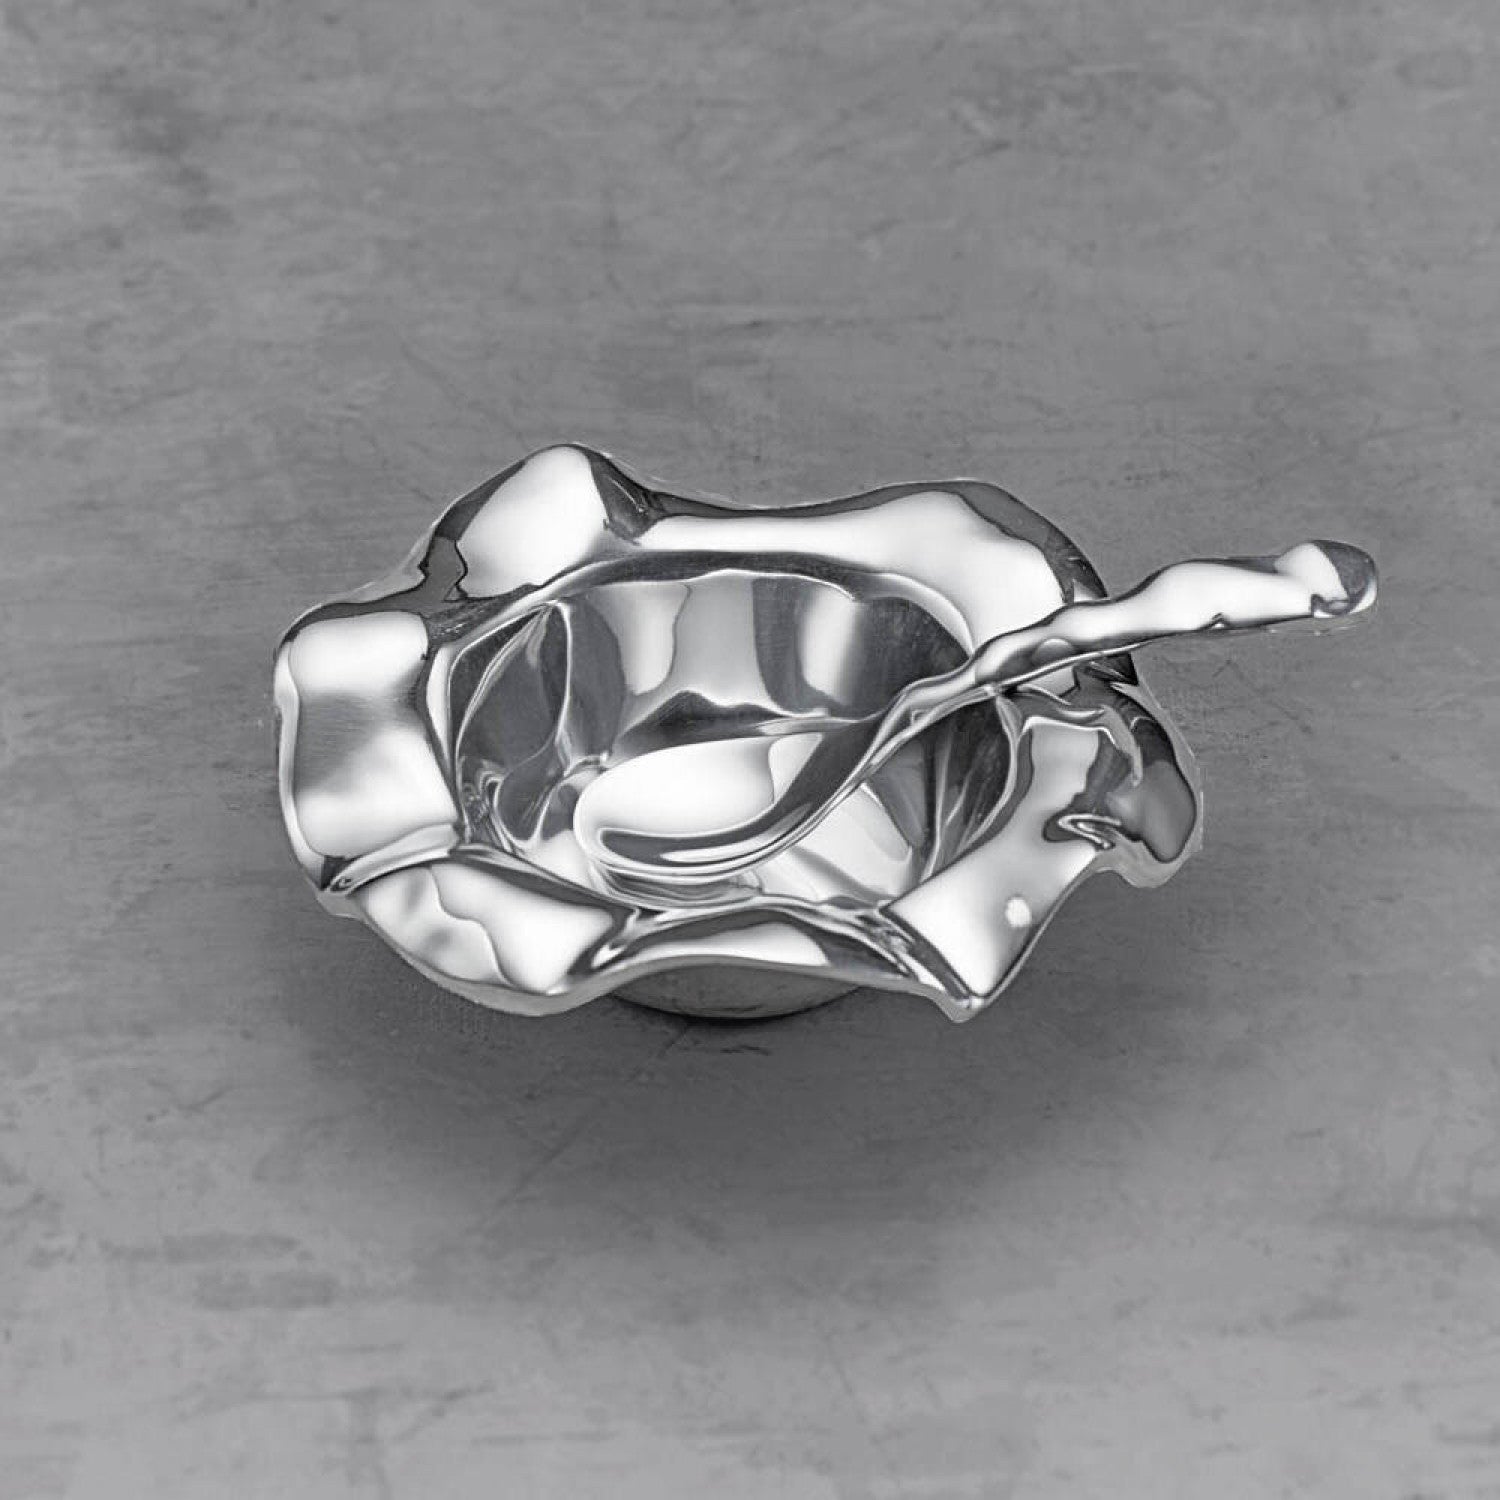 Petite Bowl with Spoon by Beatriz Ball